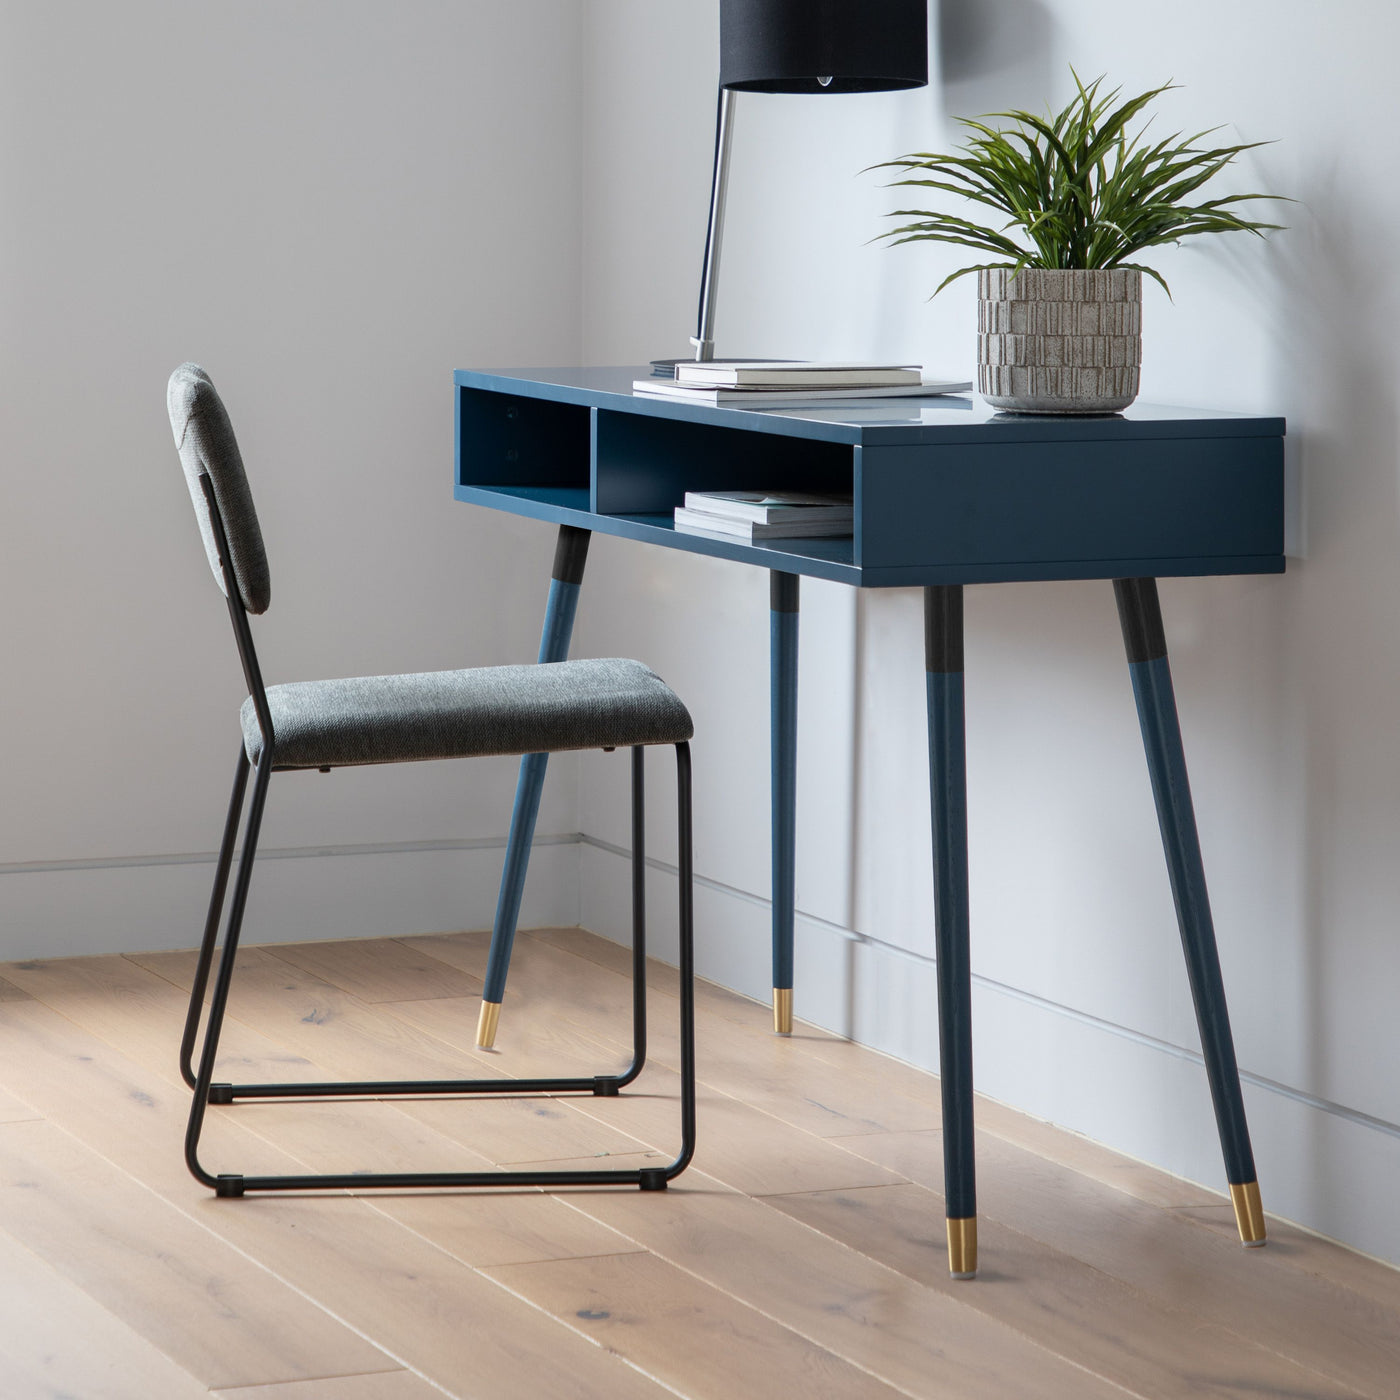 Chipping Console Table Blue 1100x450x770mm